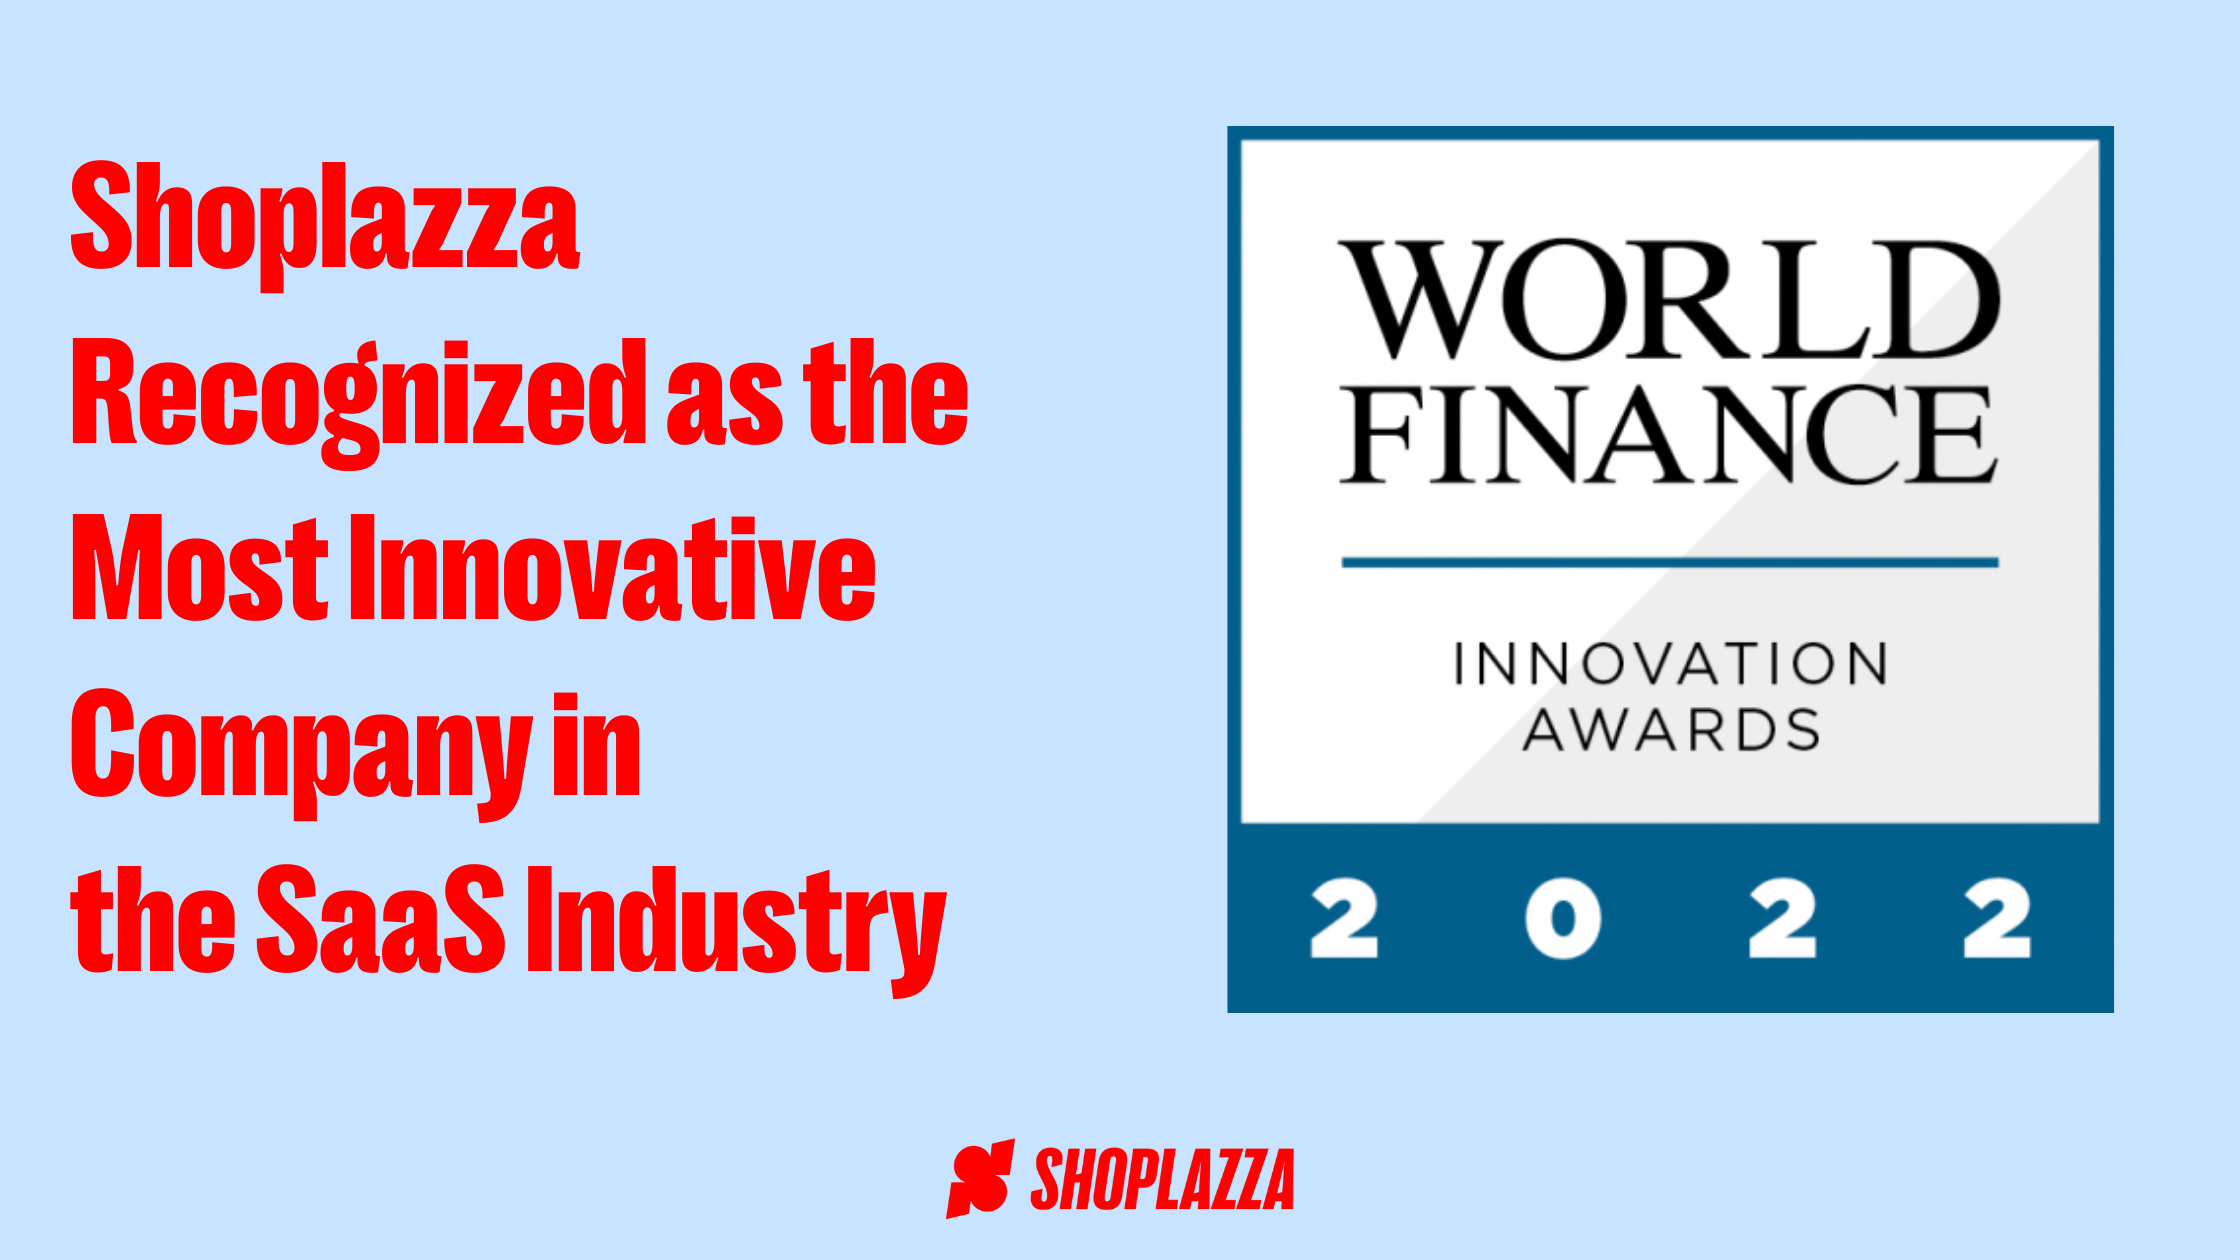 Shoplazza recognized as the most innovative company in the SaaS industry. To the right of the image, there's the logo for the World Finance Innovation Awards 2022.